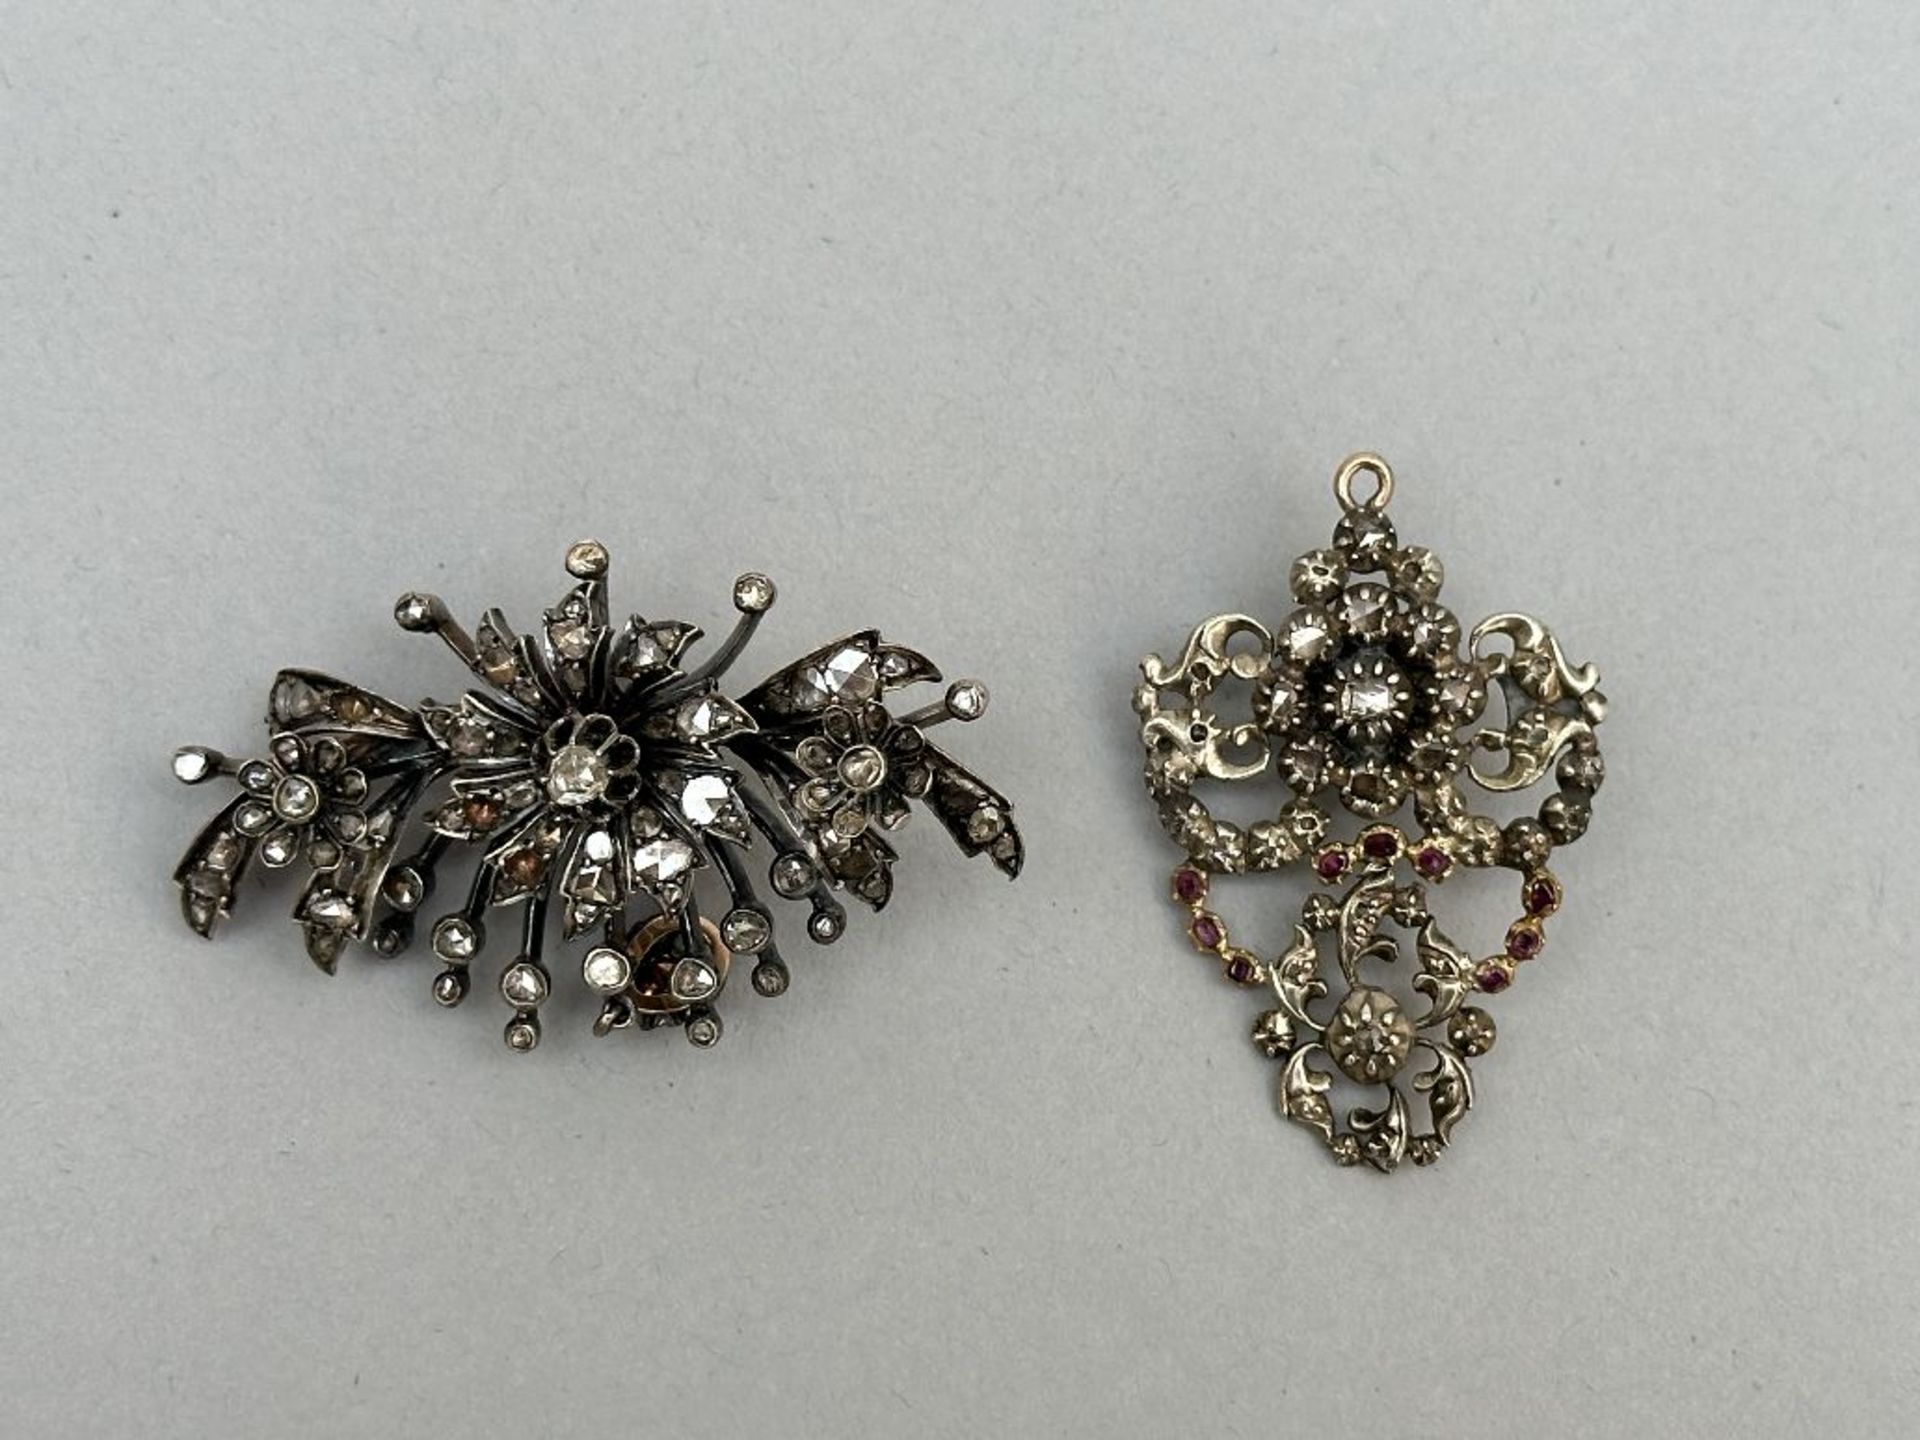 Flemish jewelry: flower brooch and pendant